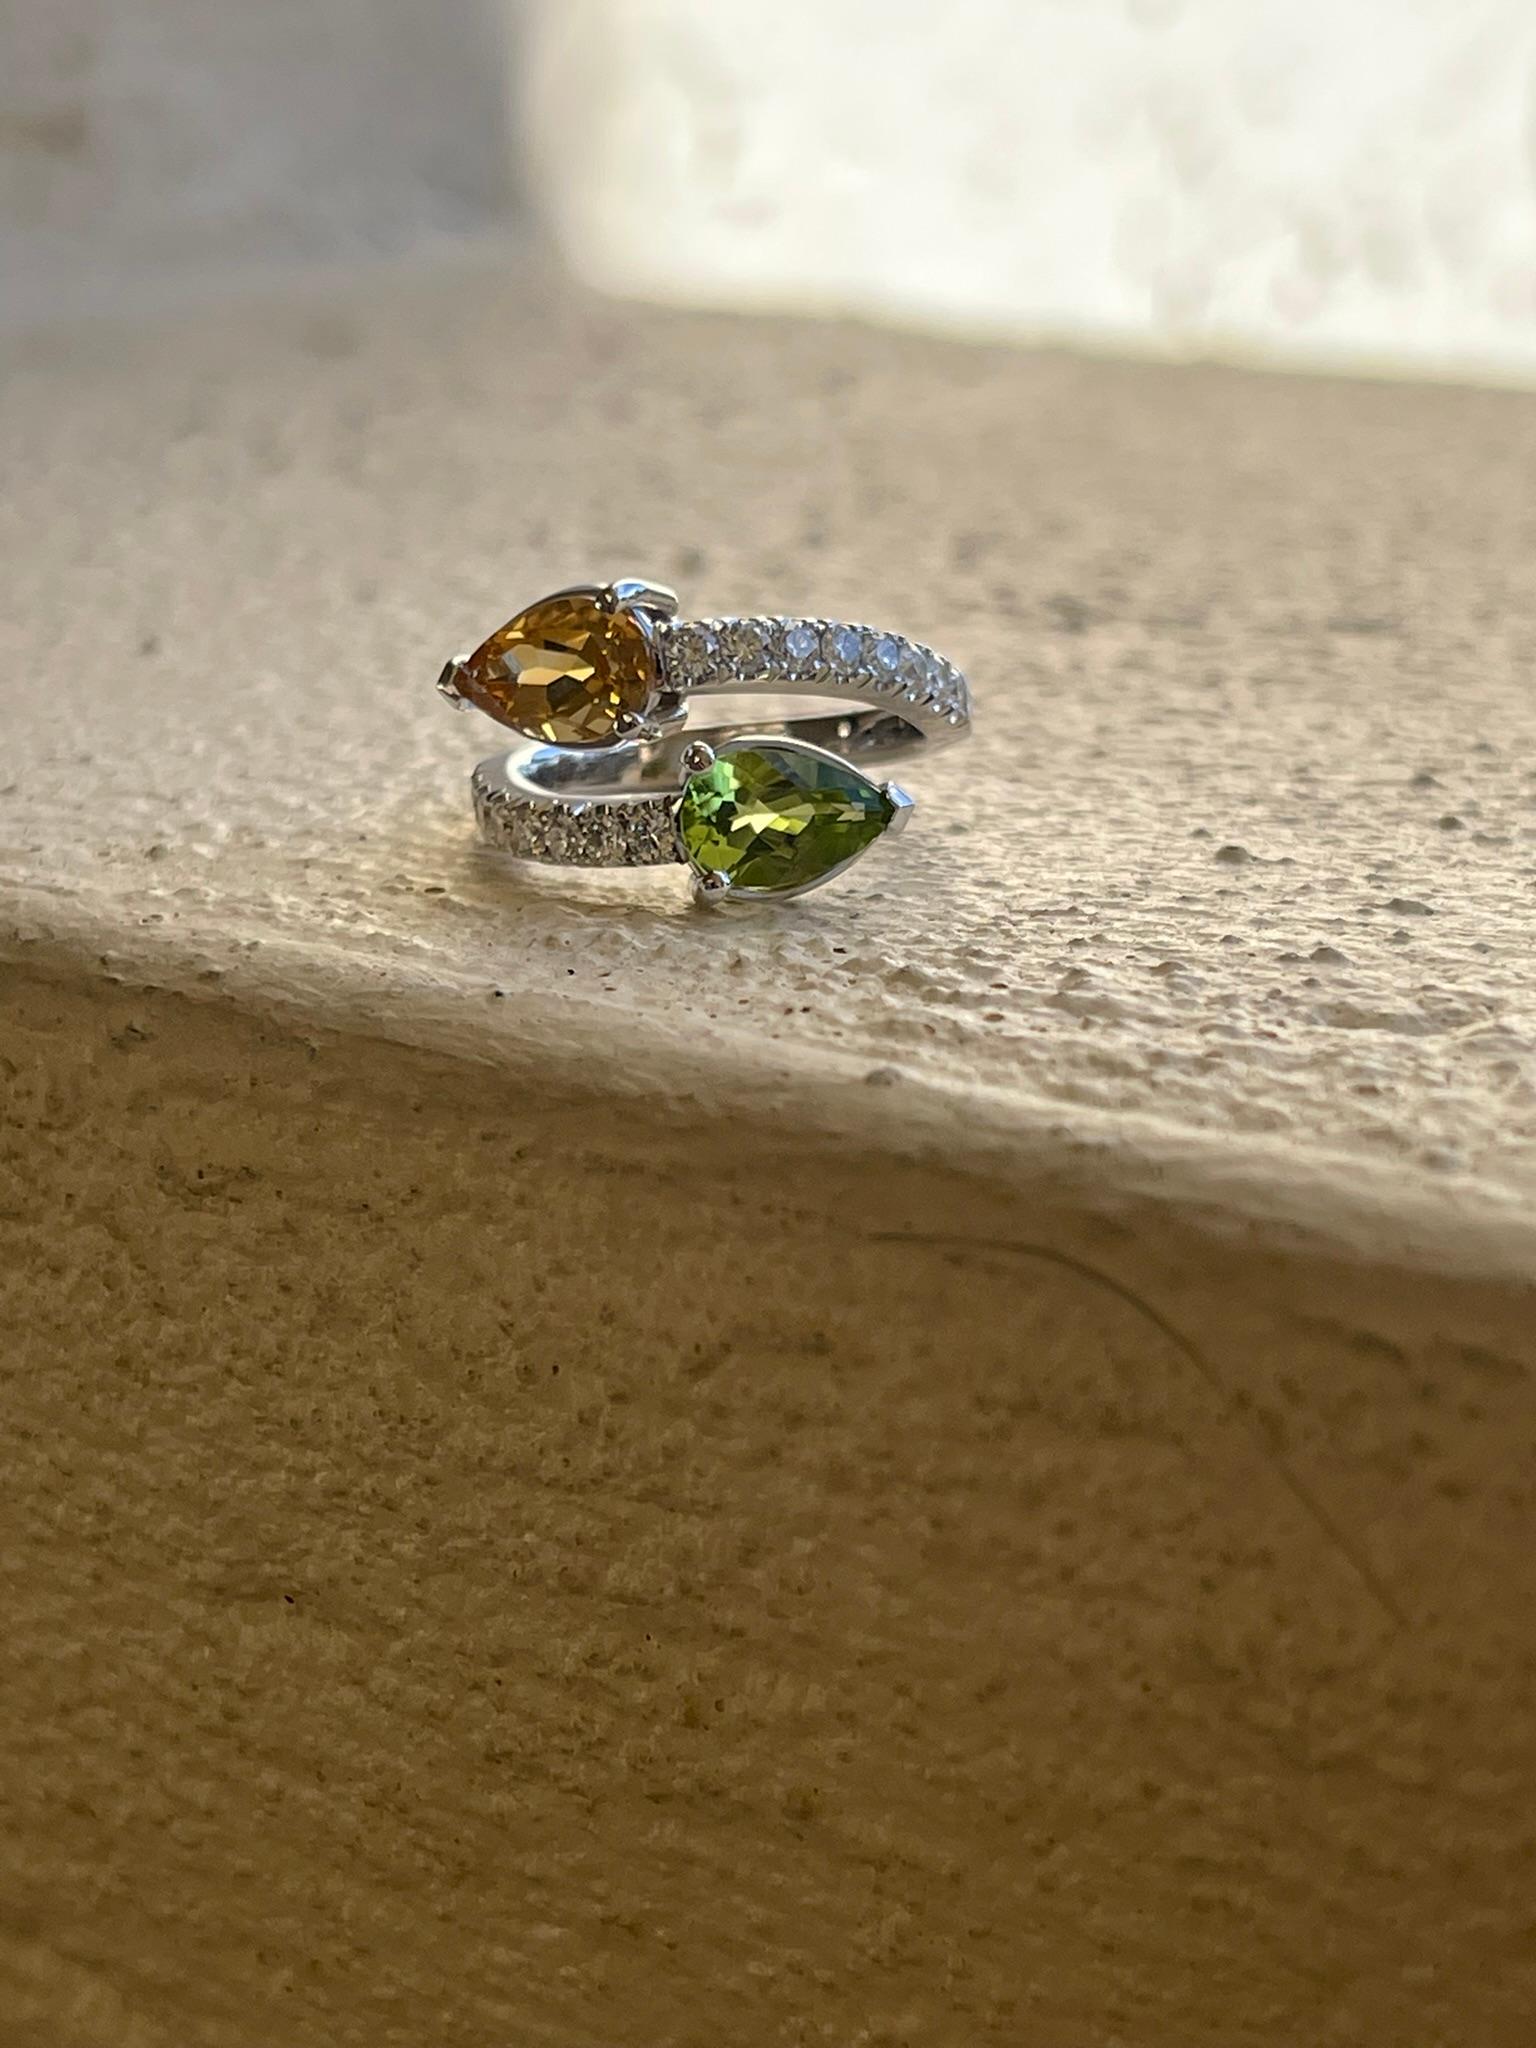 Moi et toi ring set with an excellent quality peridot and excellent quality citrine, made in 18KT yellow gold using top quality diamonds and fishtail fancy diamond setting style, absolutely gorgeous! Can be re-sized! The handling time to ship this